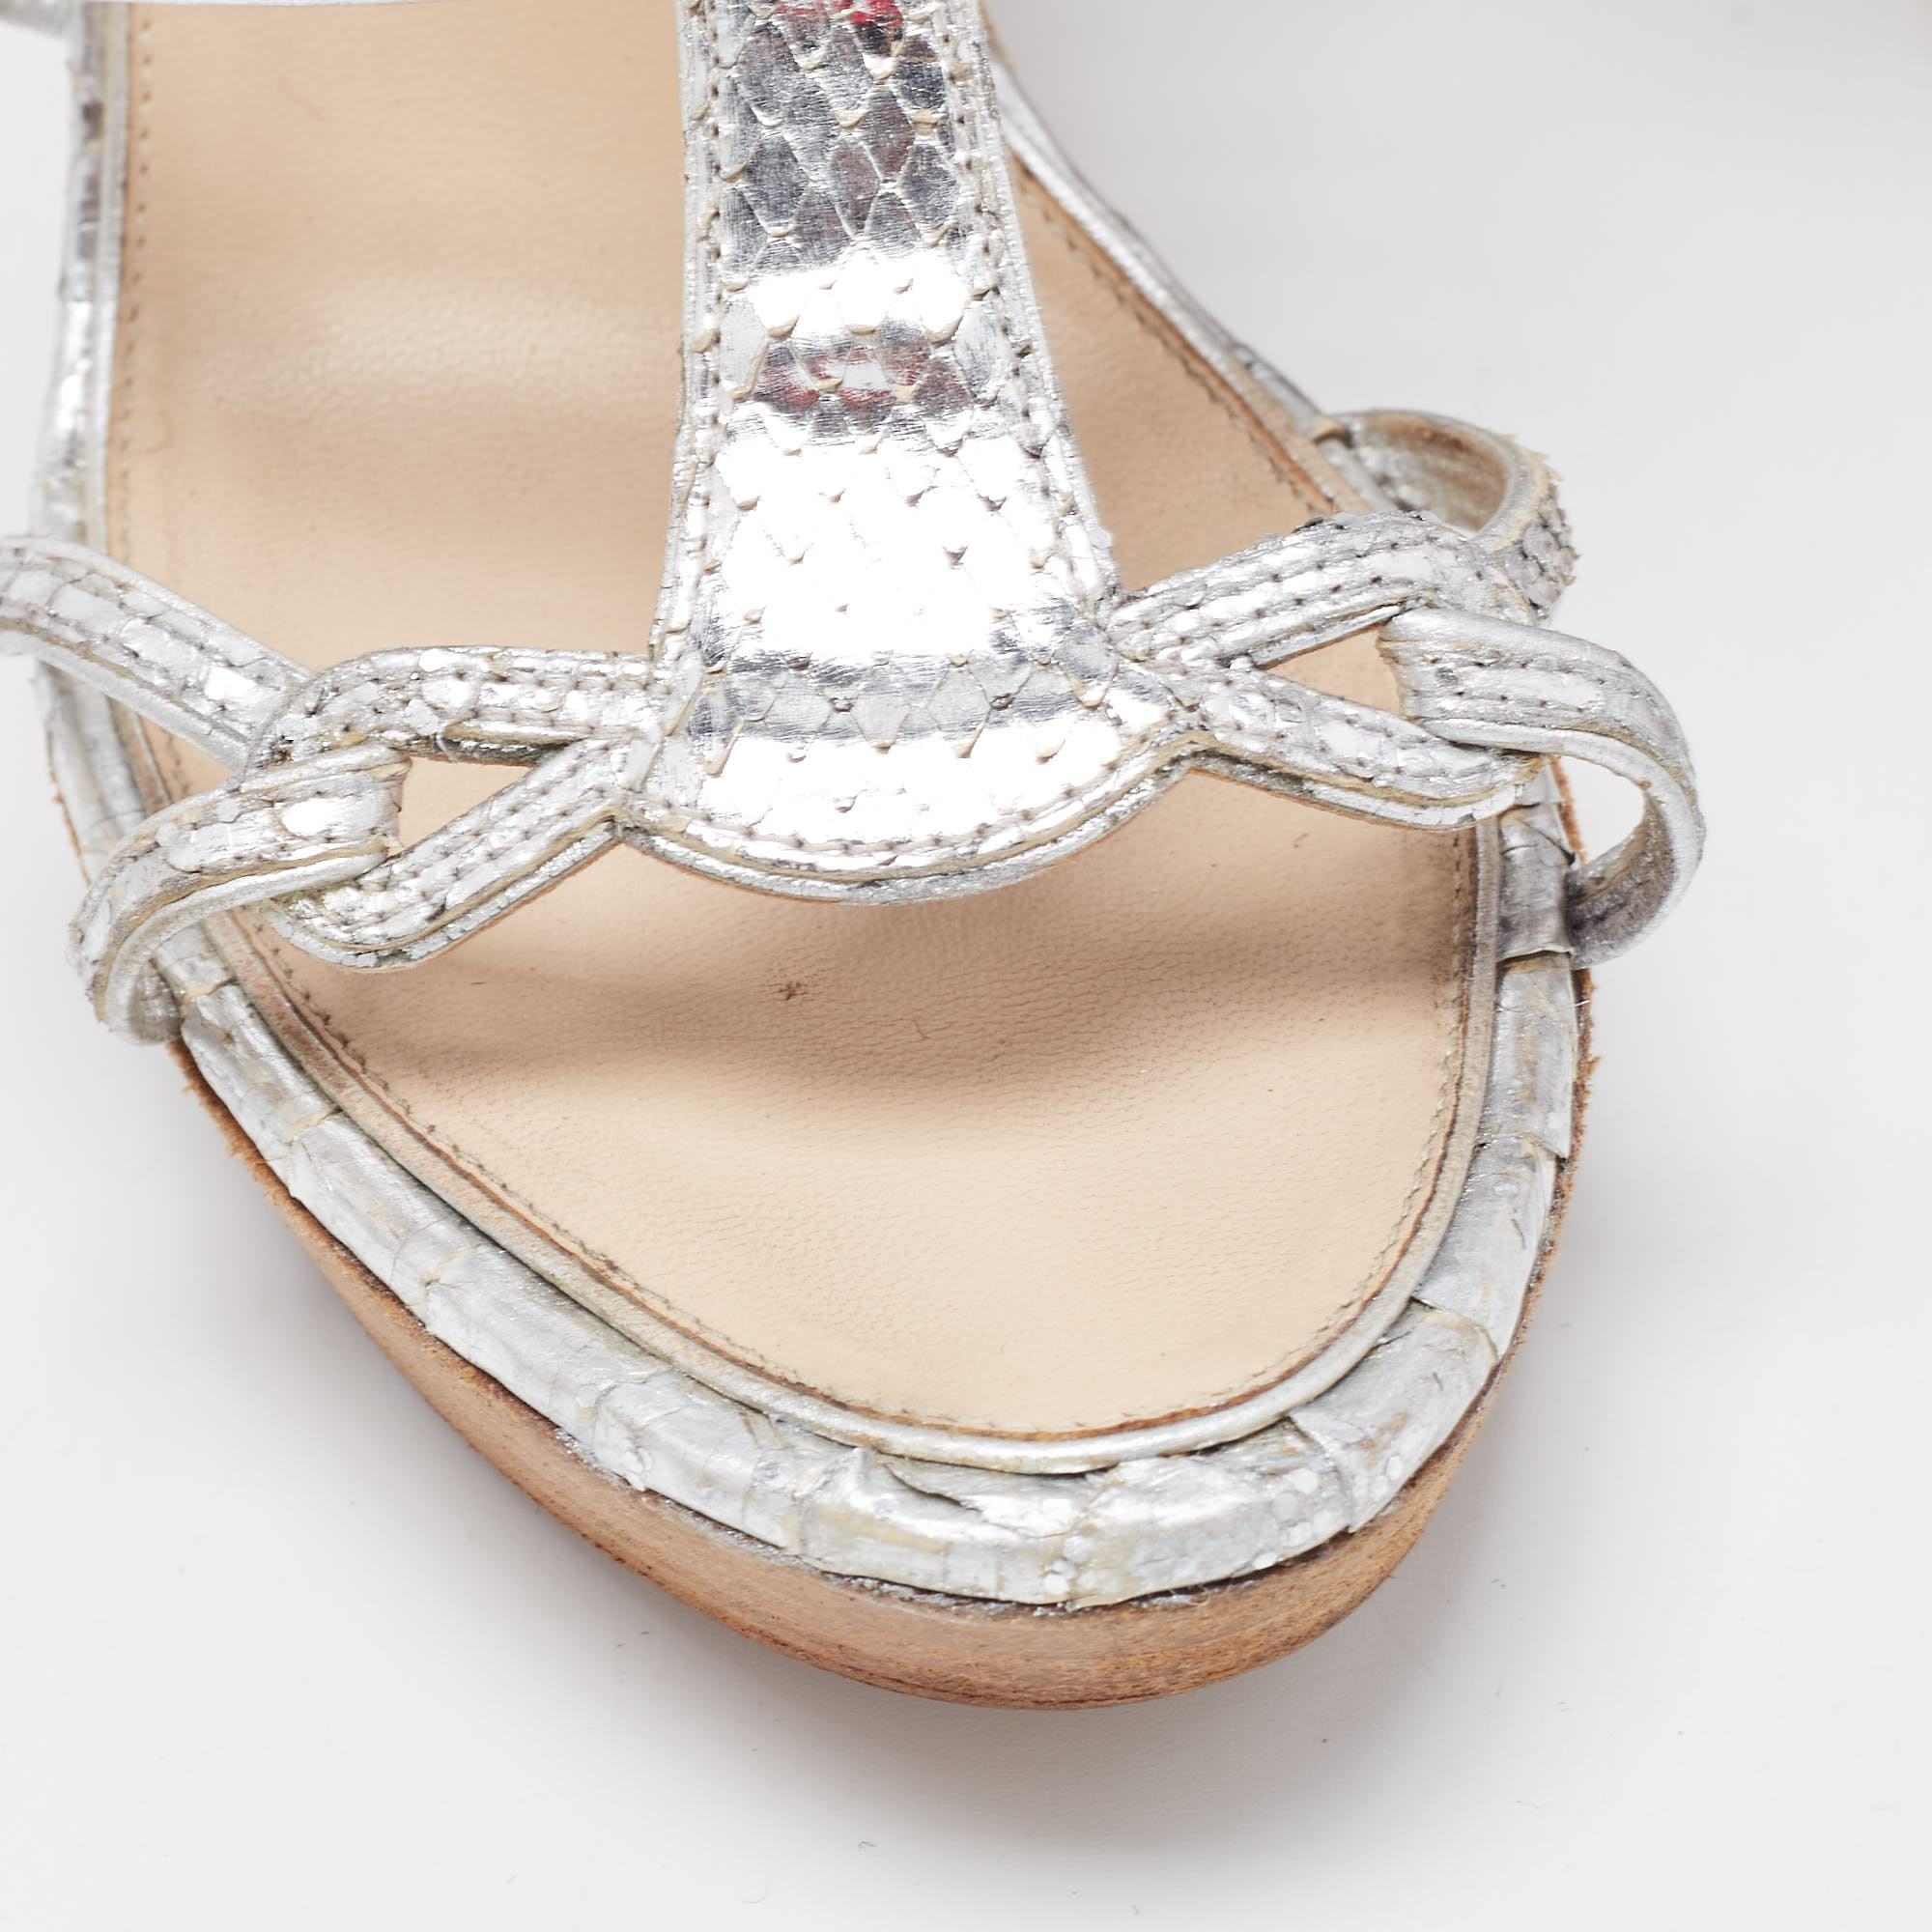 Chanel Silver Python Embossed Wedge Sandals Size 37.5